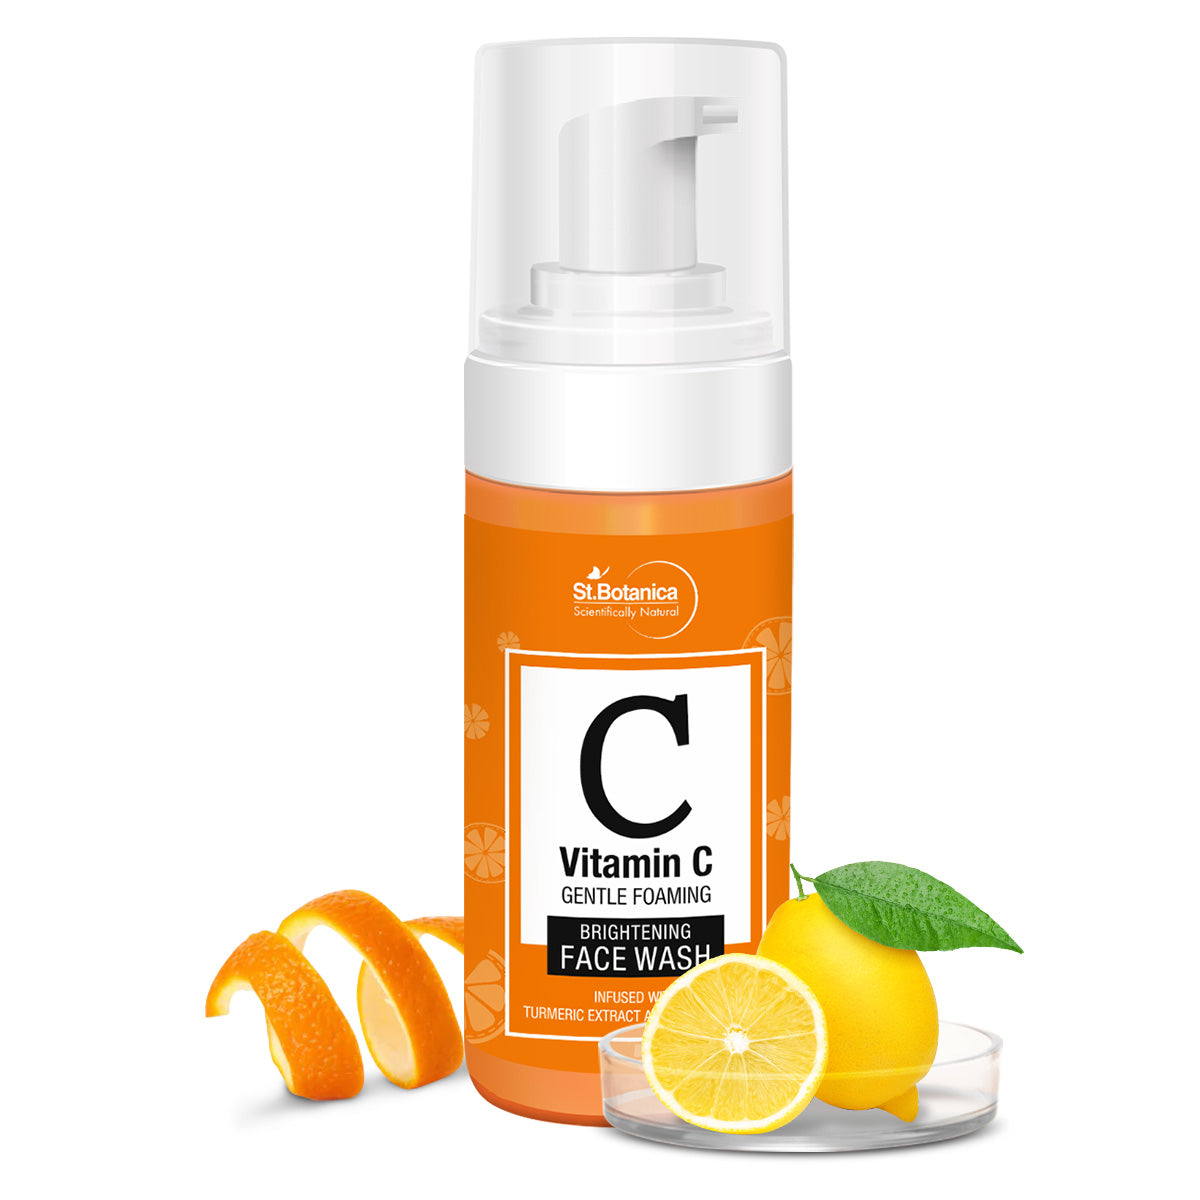 St.Botanica Vitamin C Foaming Brightening Face Wash - No Parabens, Sulphate, Silicones, 120 ml